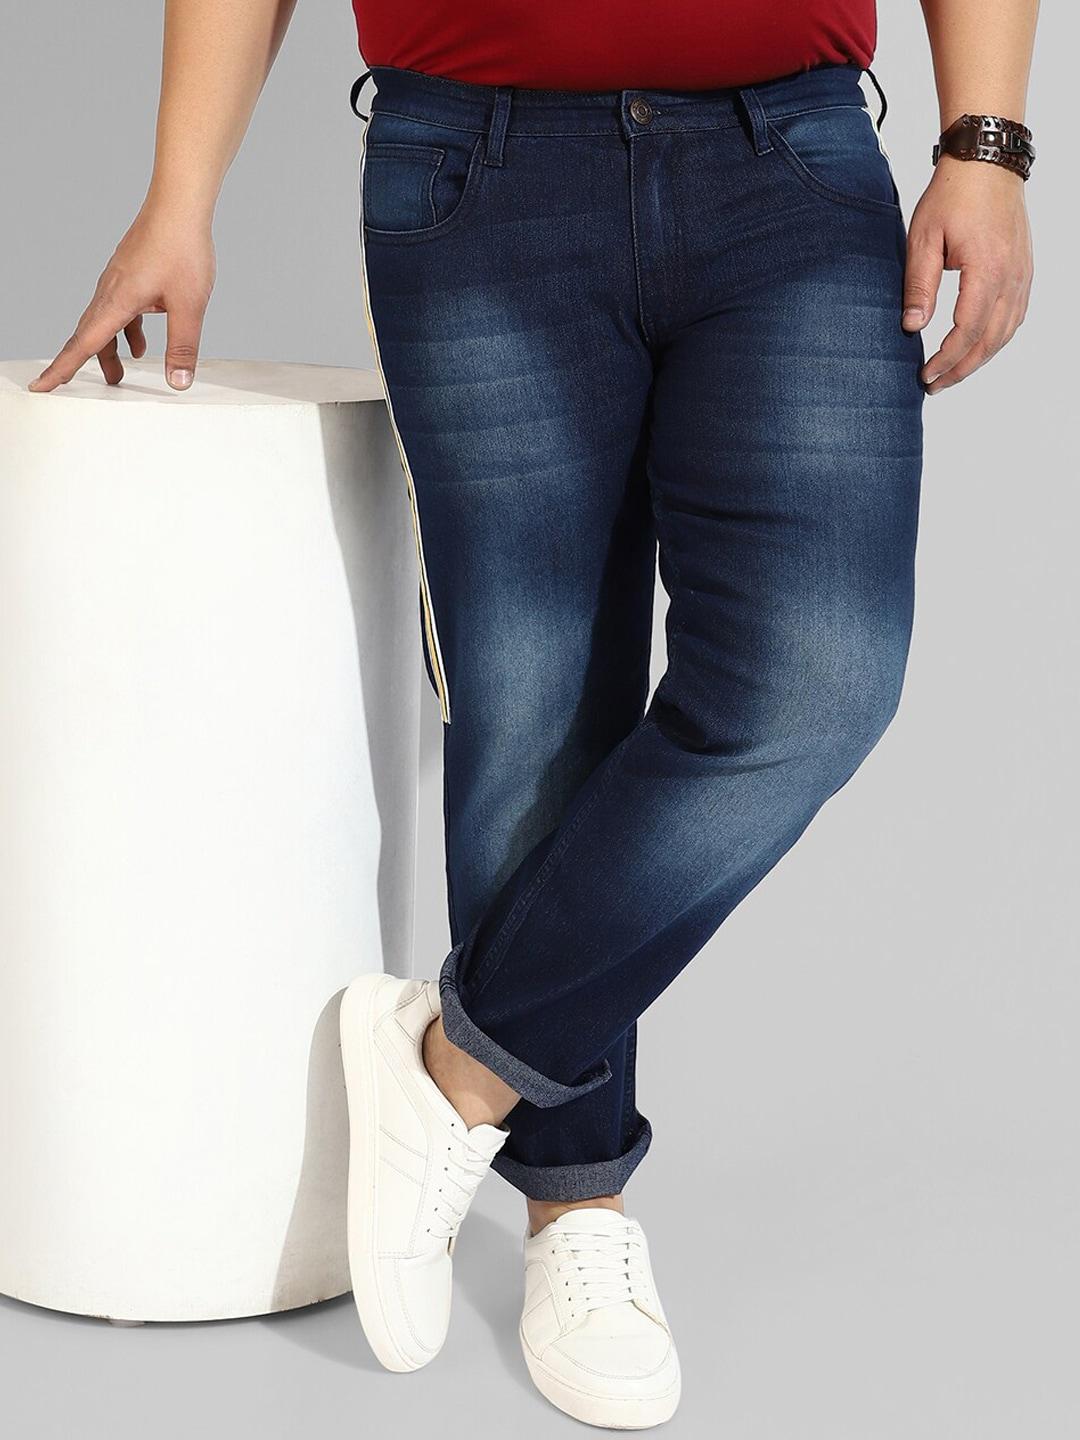 instafab plus men plus size classic relaxed fit light fade stretchable jeans